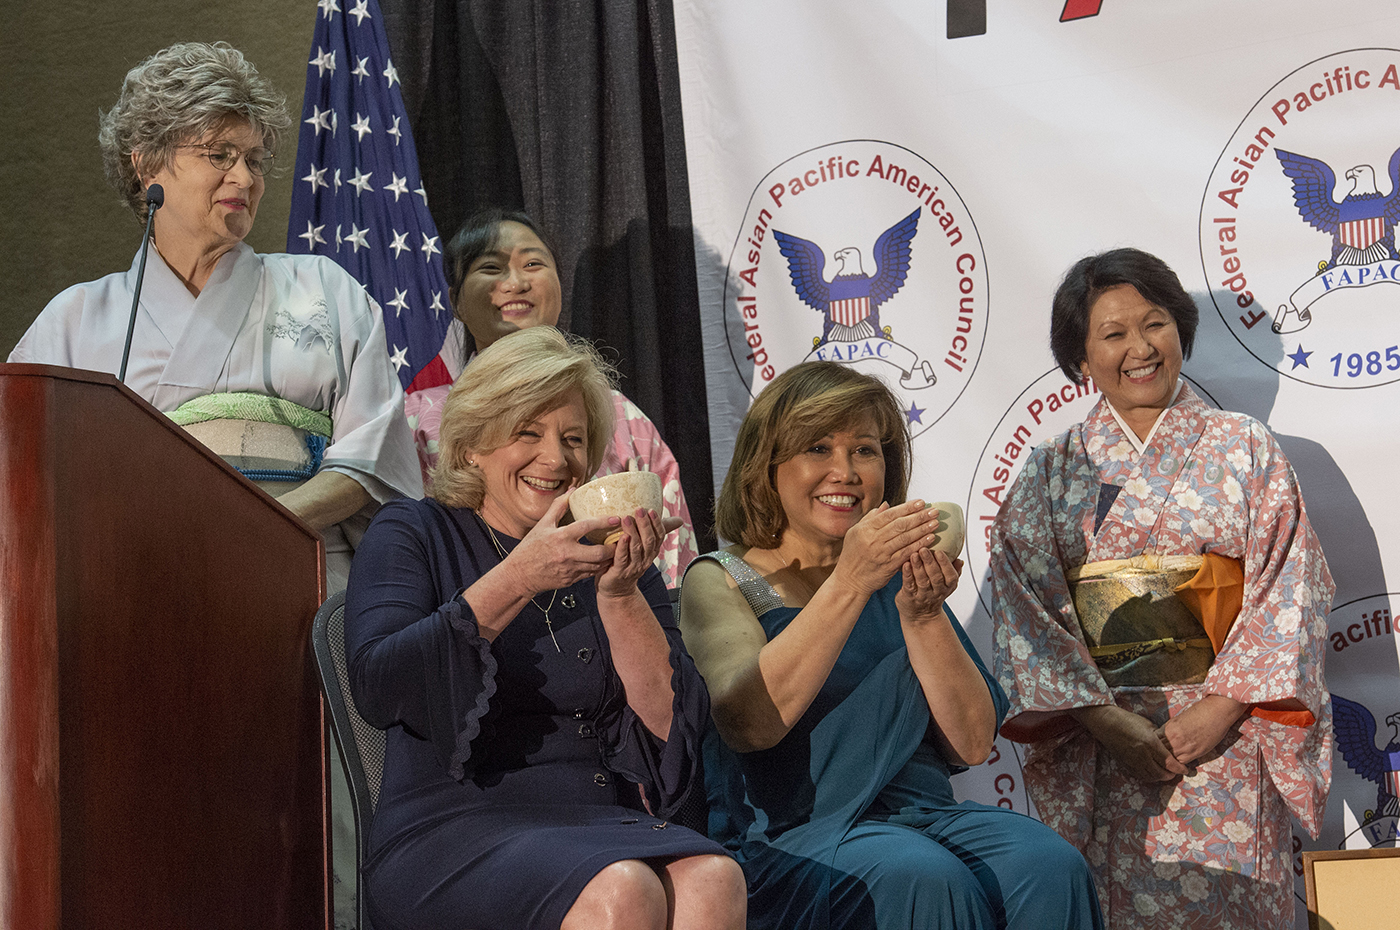 Jody Singer, seated left, participates in a traditional Japanese tea ceremony with FAPAC President Olivia Adrian, seated right.